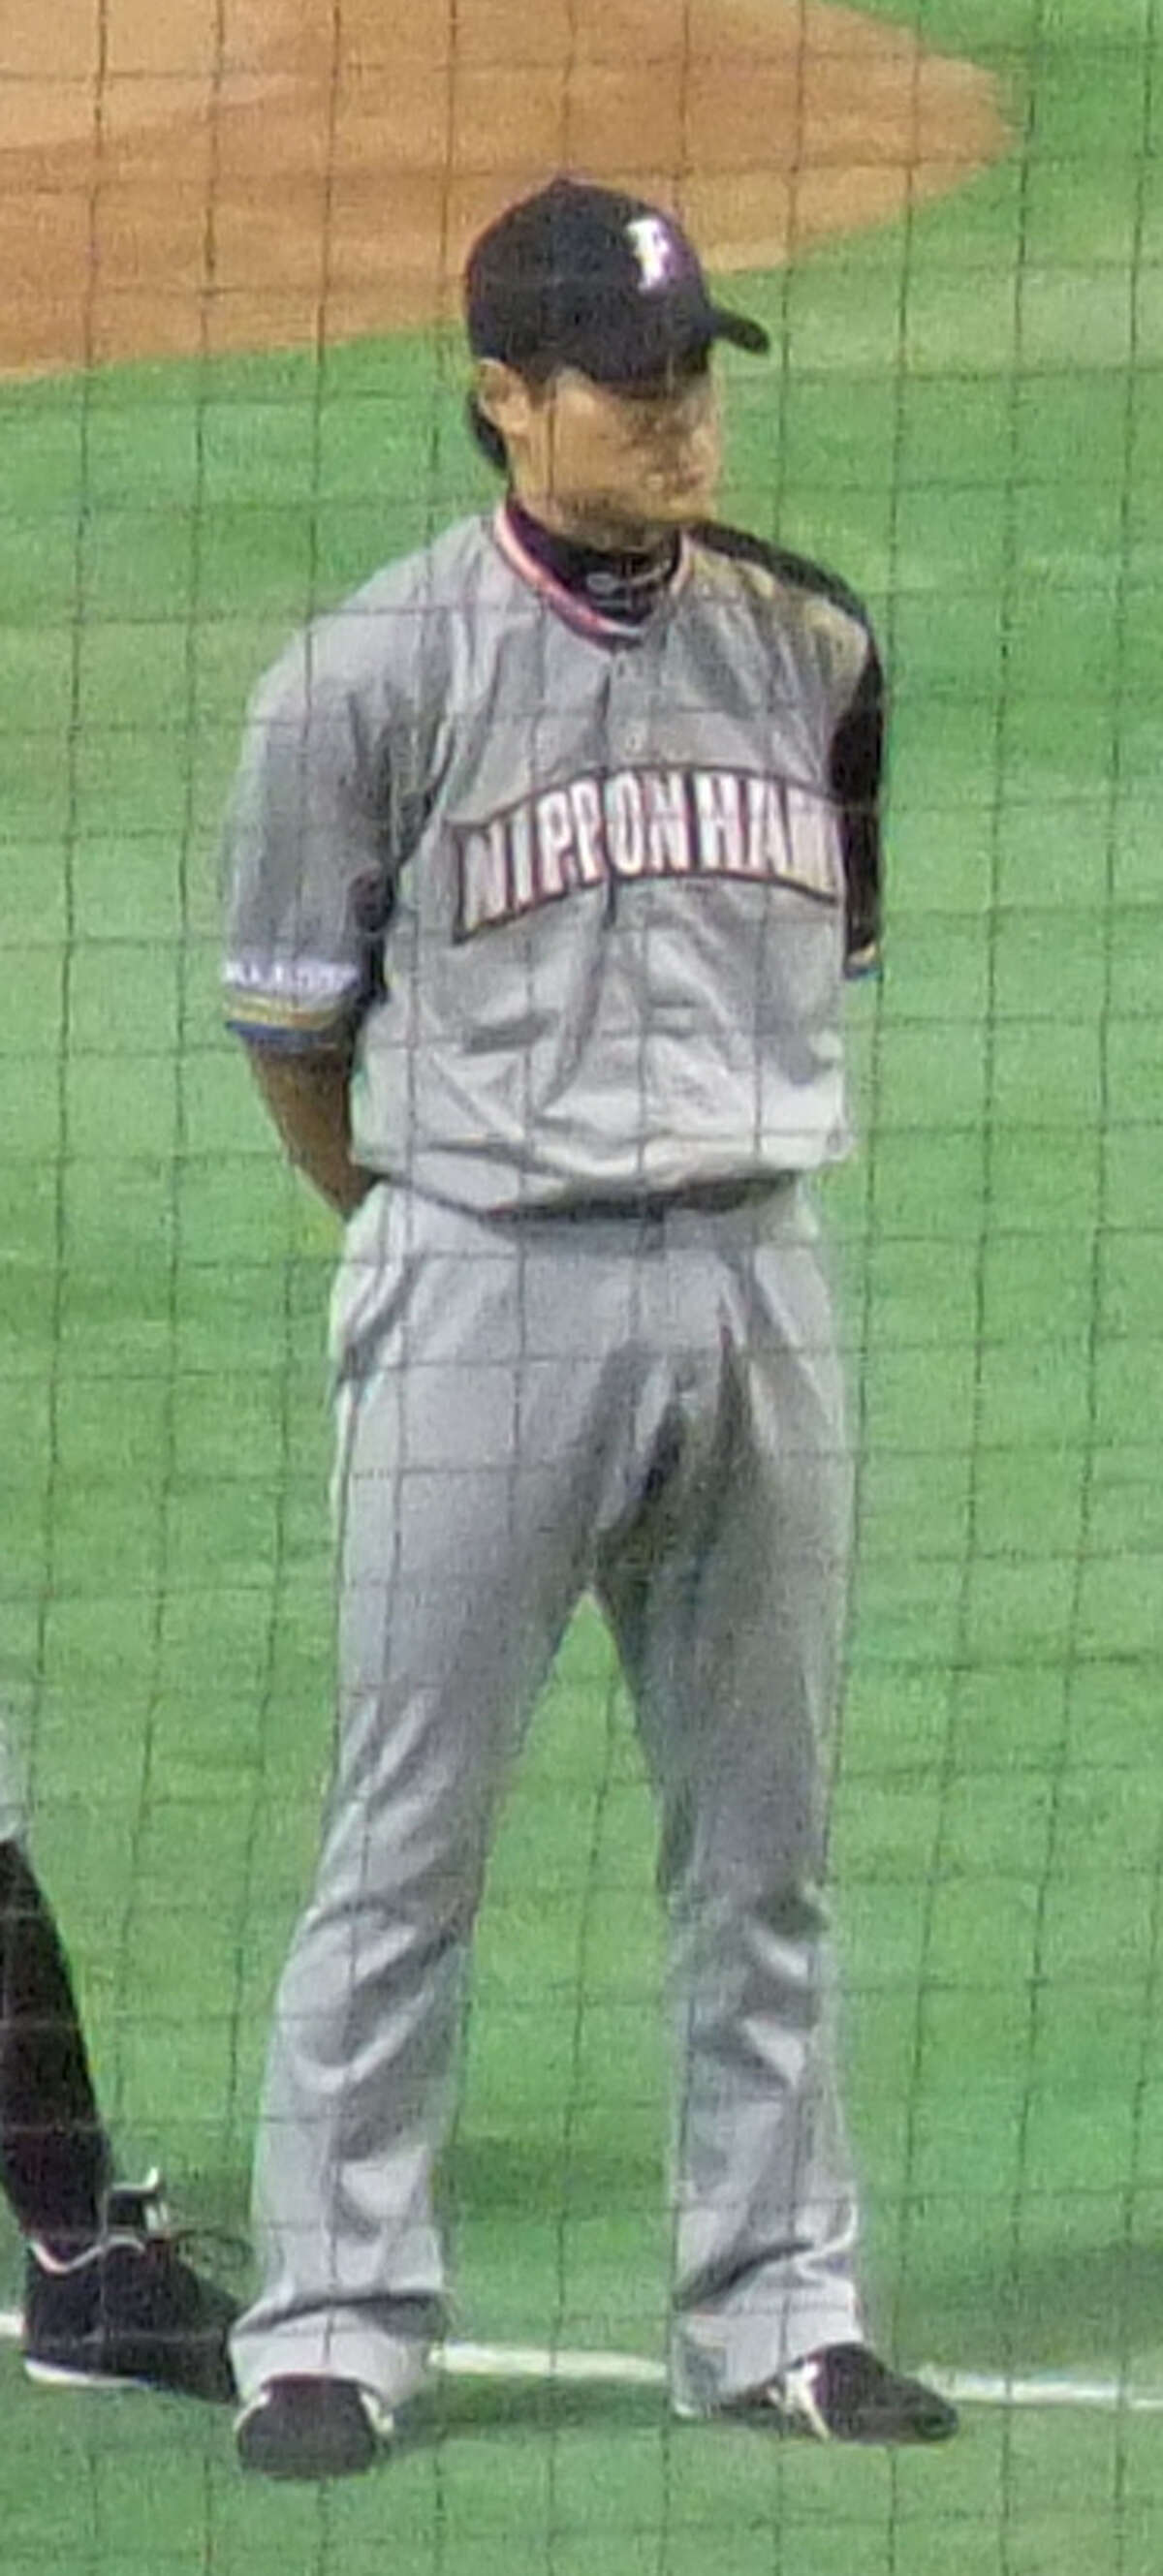 Kensuke Tanaka played with the Nippon Ham Fighters.